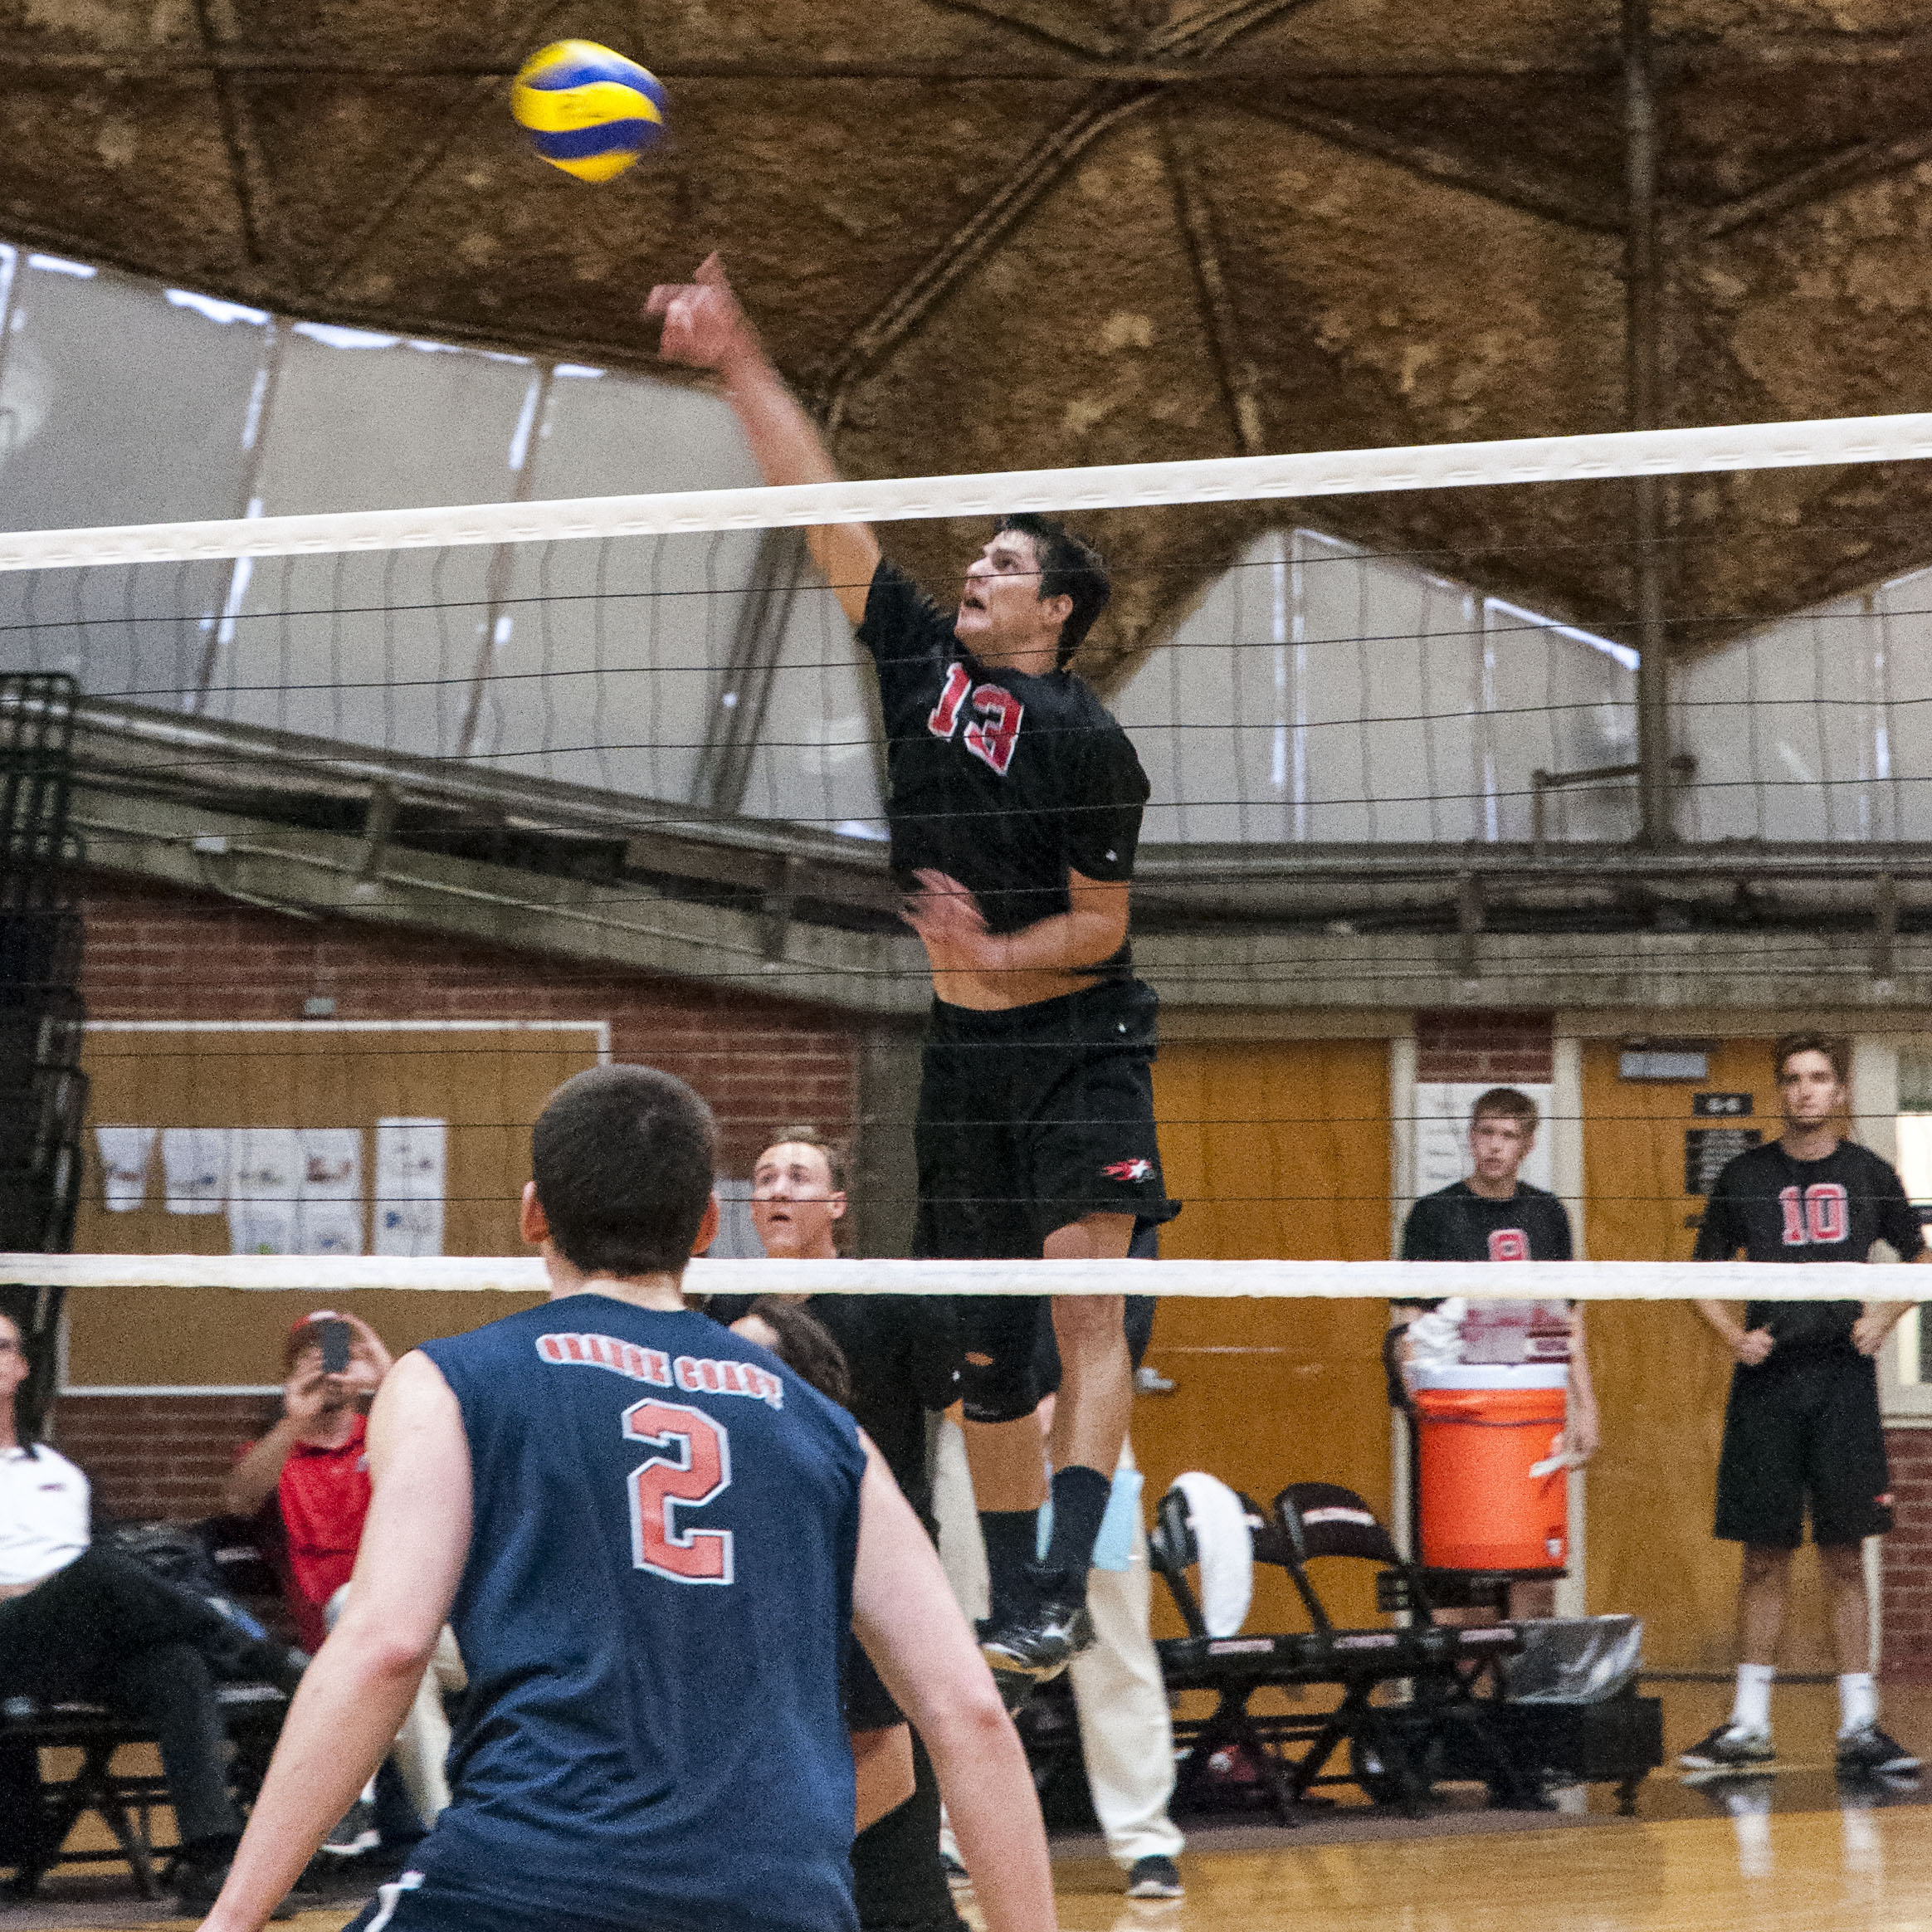 A male Palomar volleyball player jumps and hits the ball over the net as an opponent in the foreground watches.